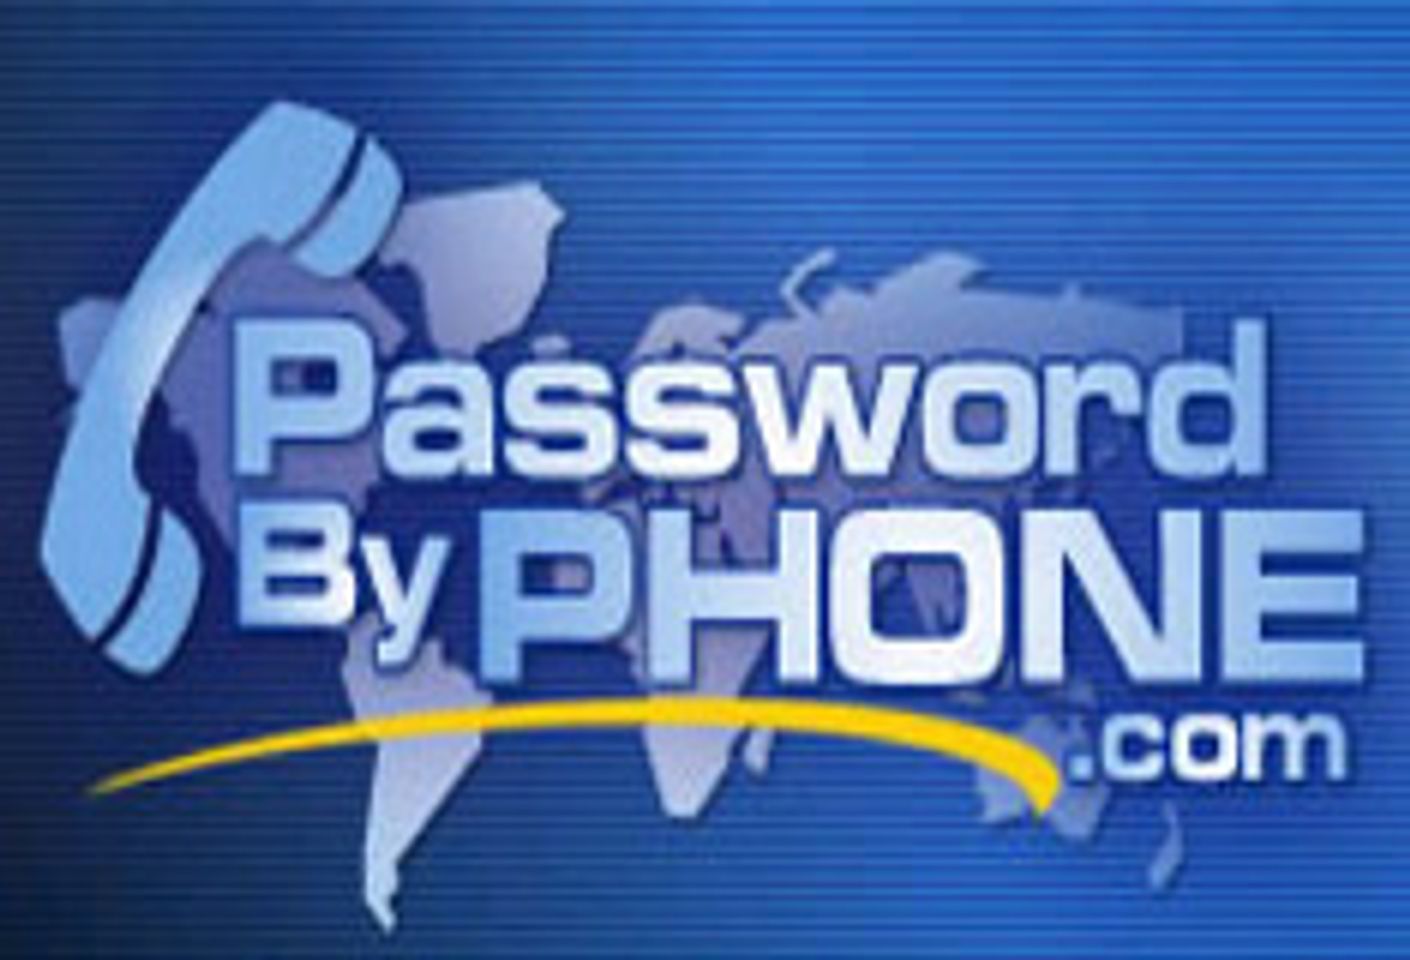 PasswordByPhone: Recurring Rate Reaches 15 Percent